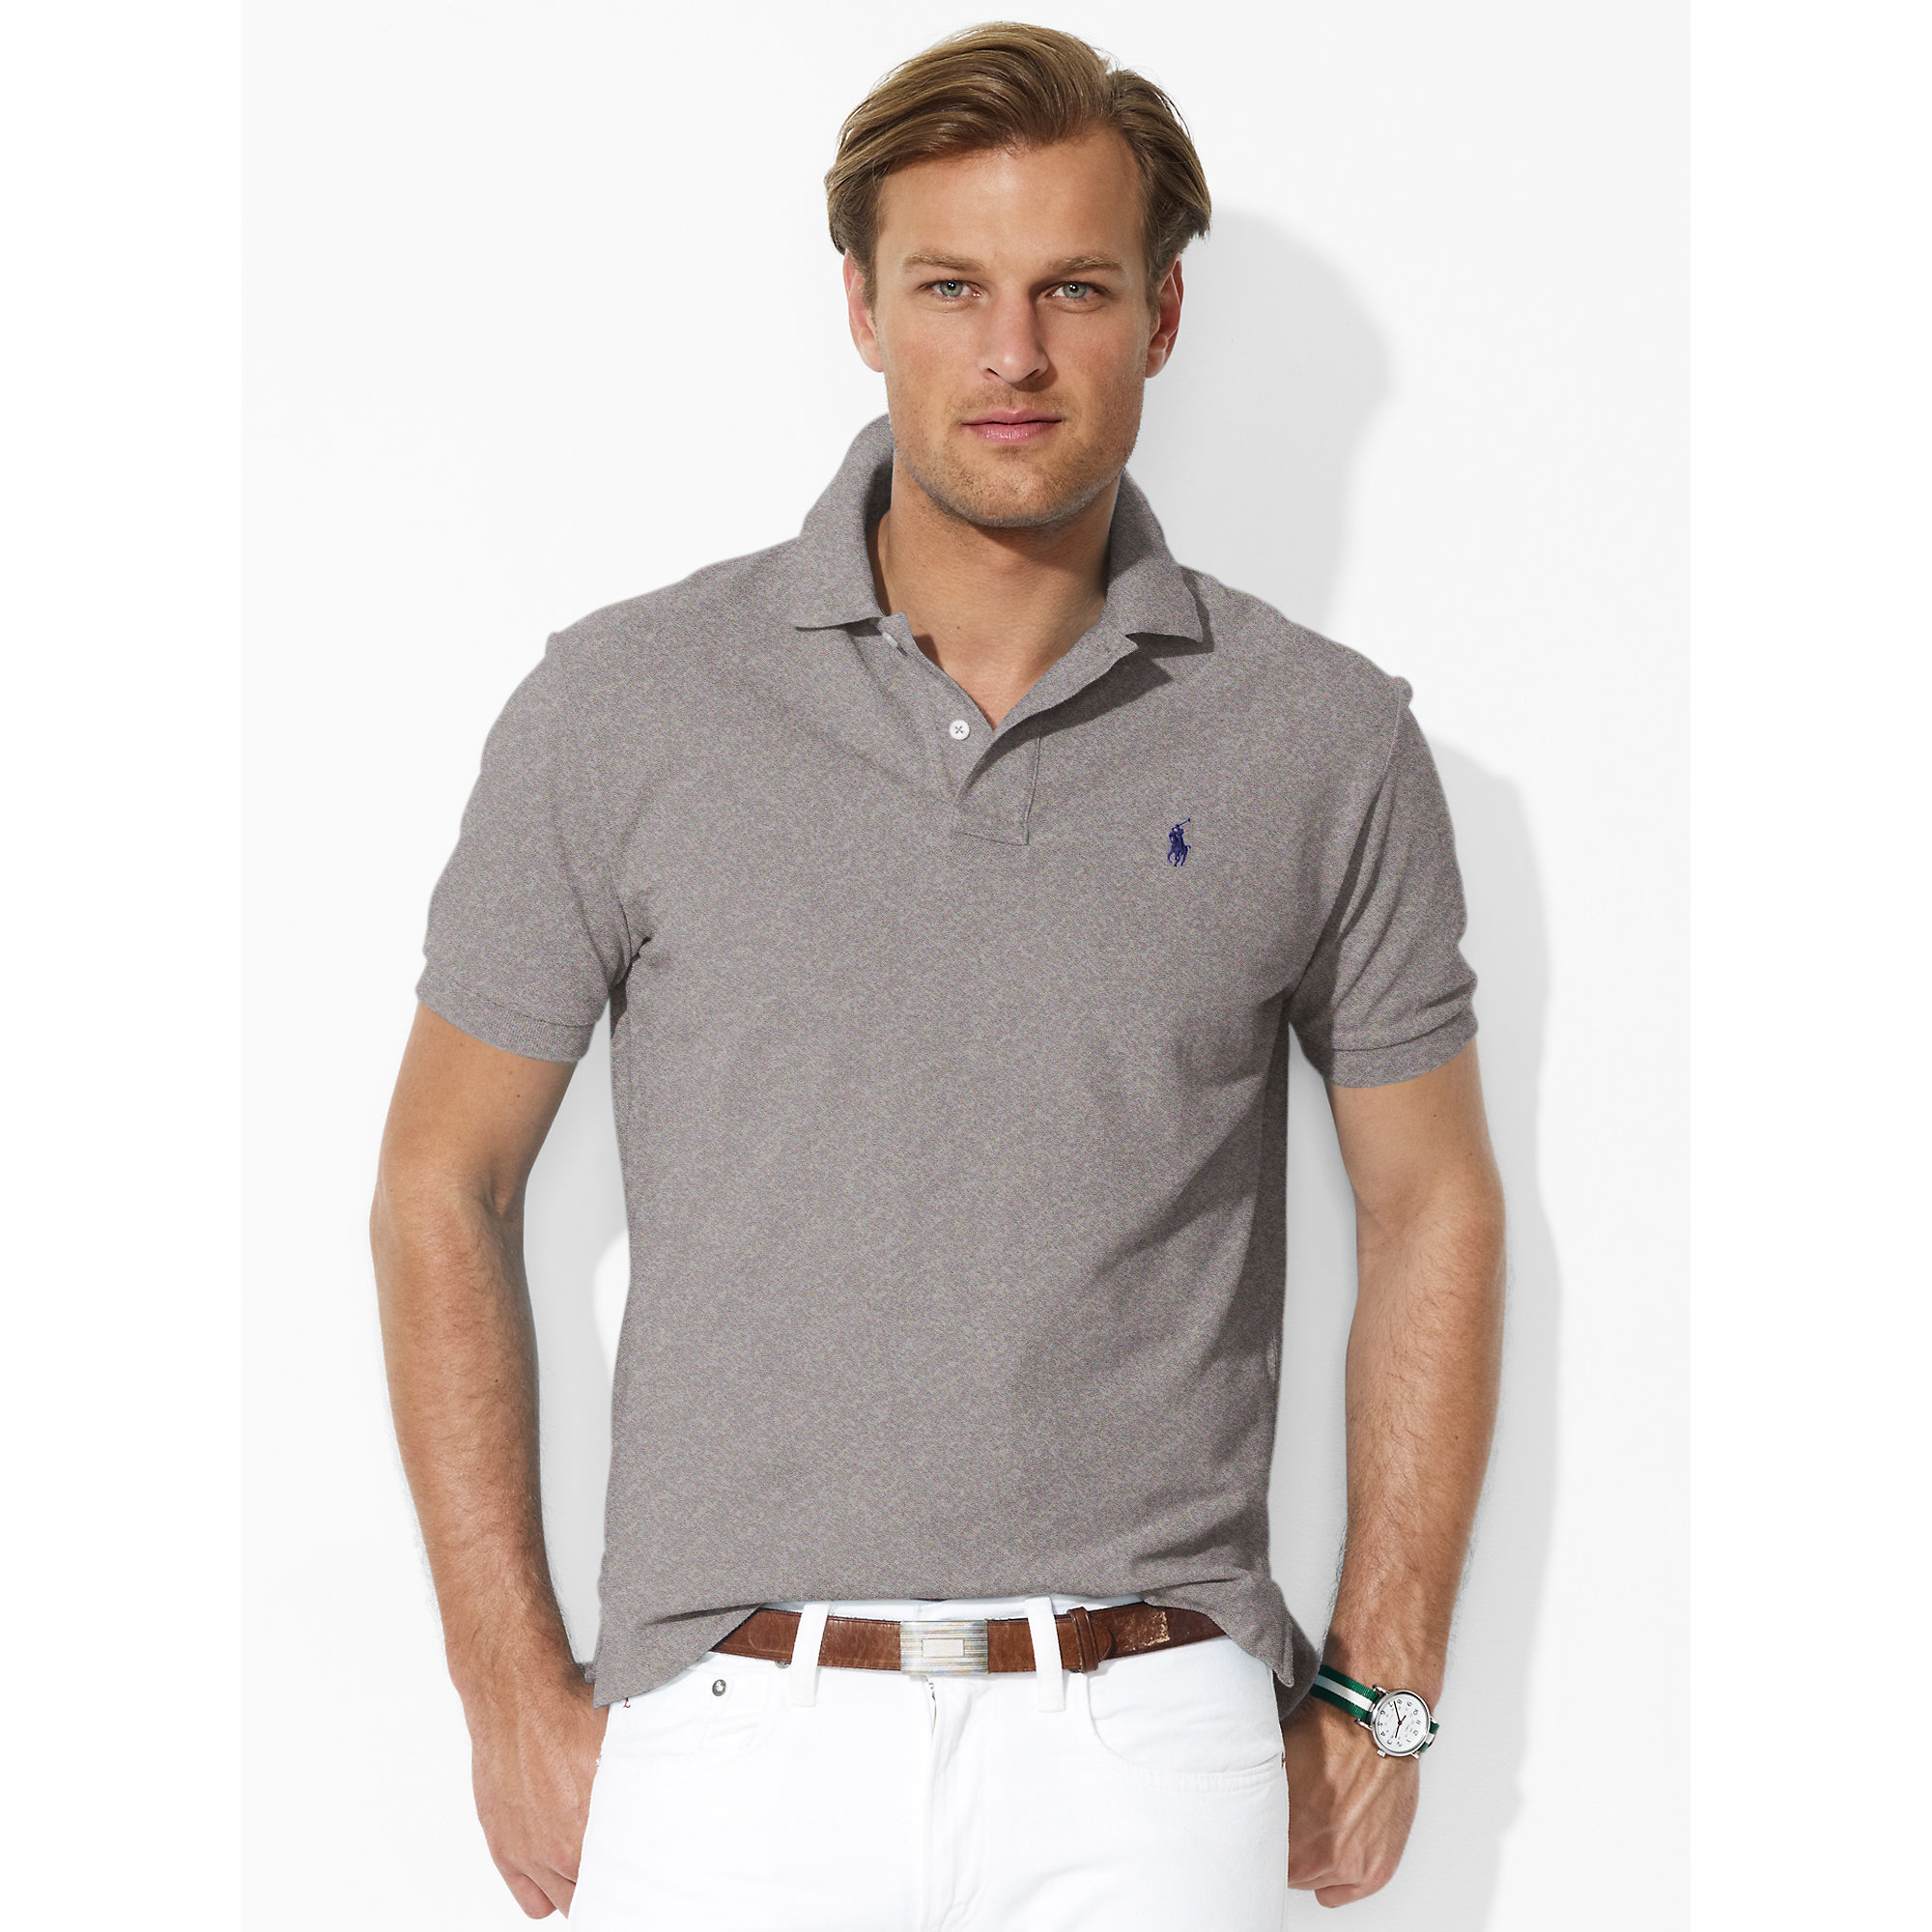 Buy > men's classic fit long sleeve mesh polo > in stock